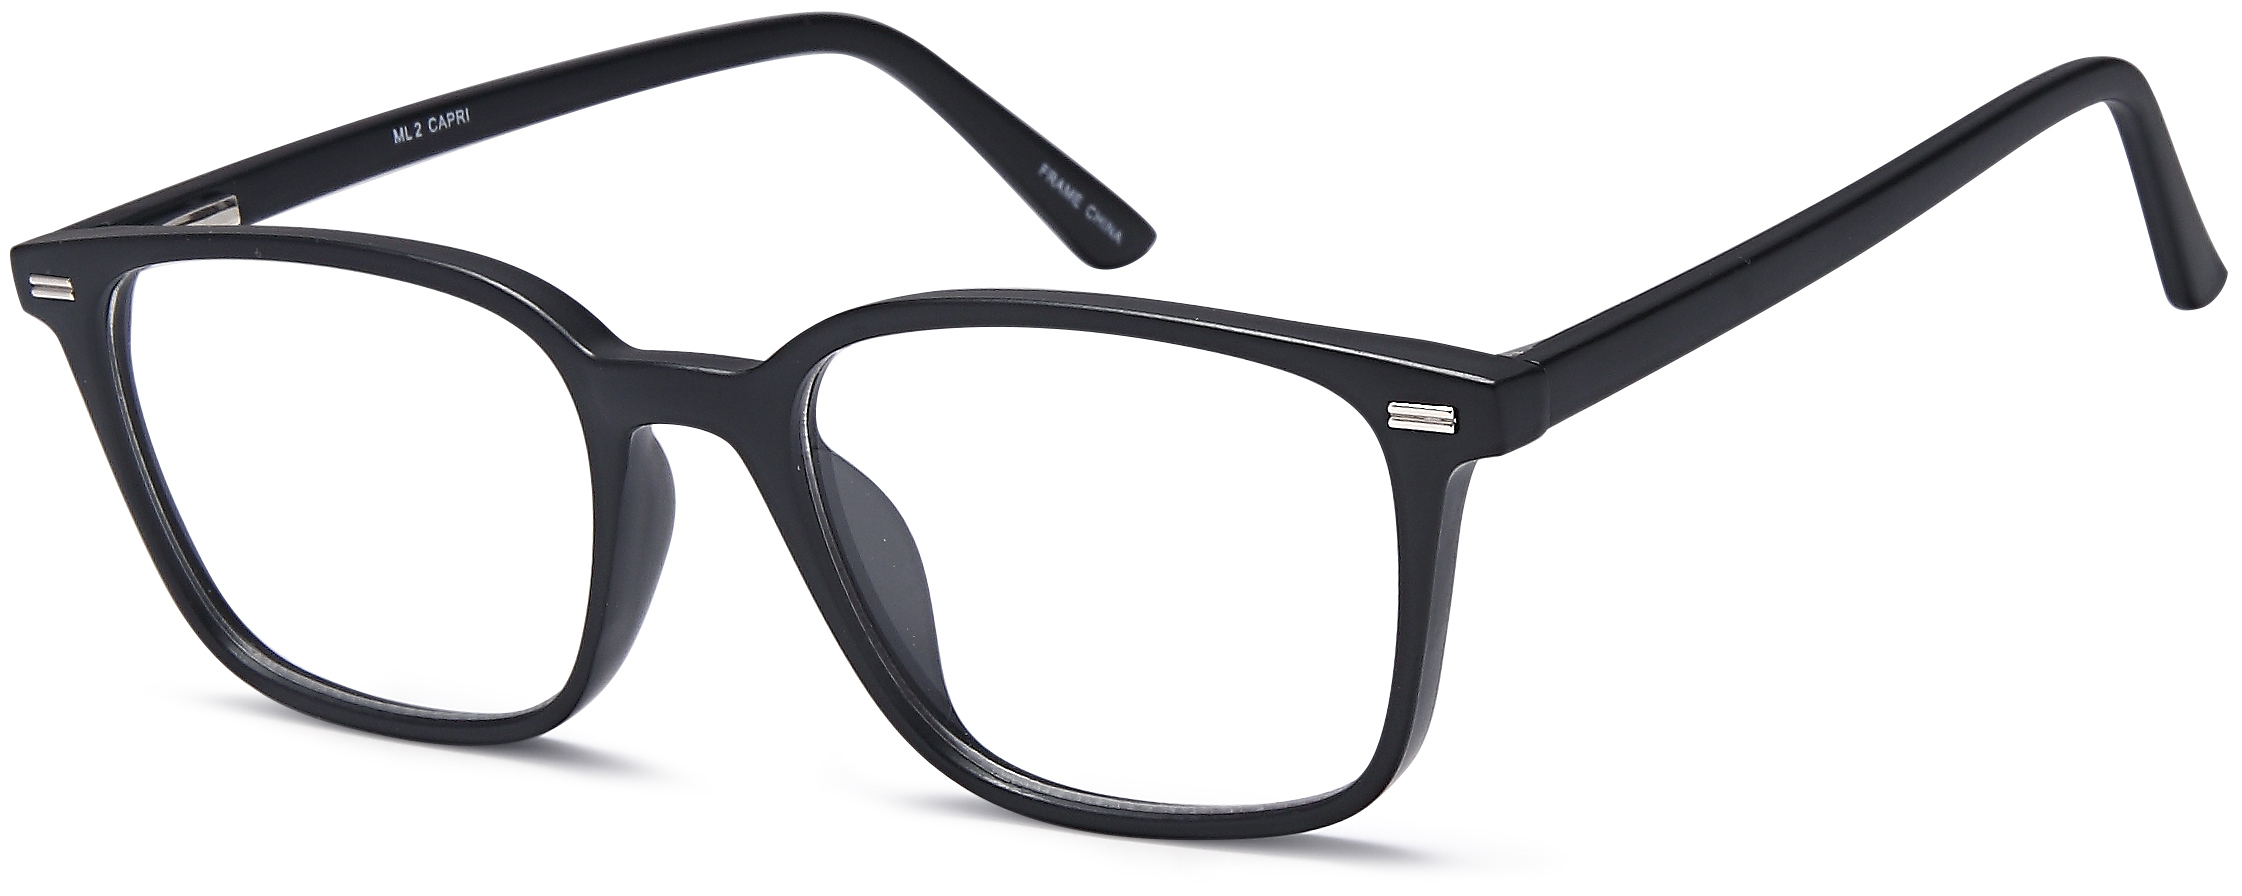 Picture of Millennial Eyeglasses ML2